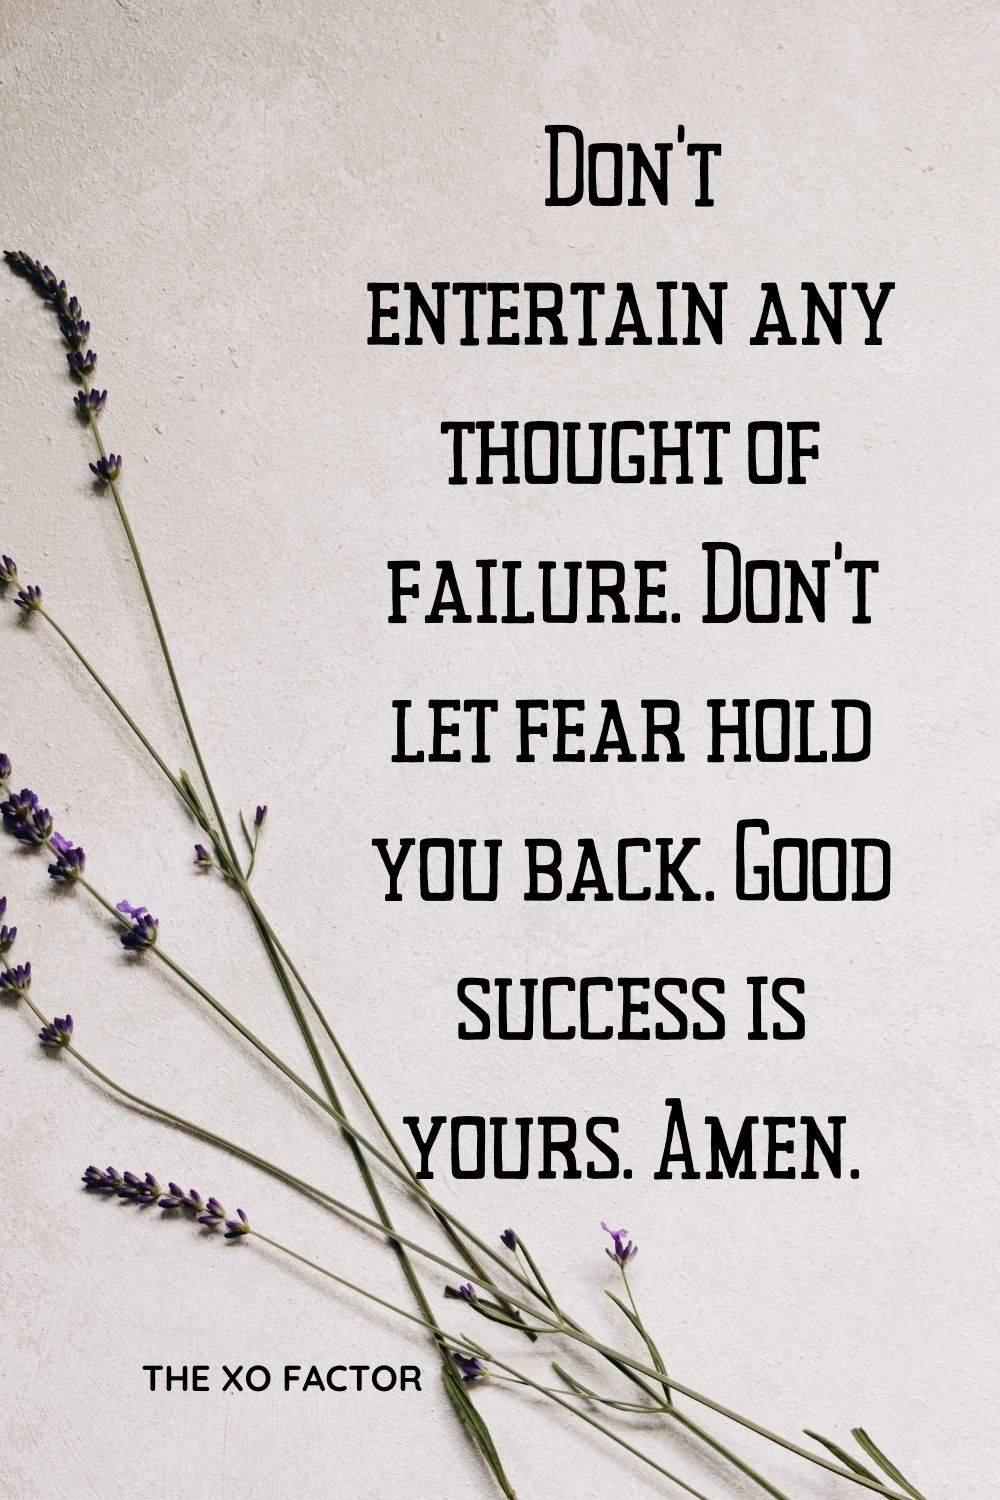 Don’t entertain any thought of failure. Don’t let fear hold you back. Good success is yours. Amen.